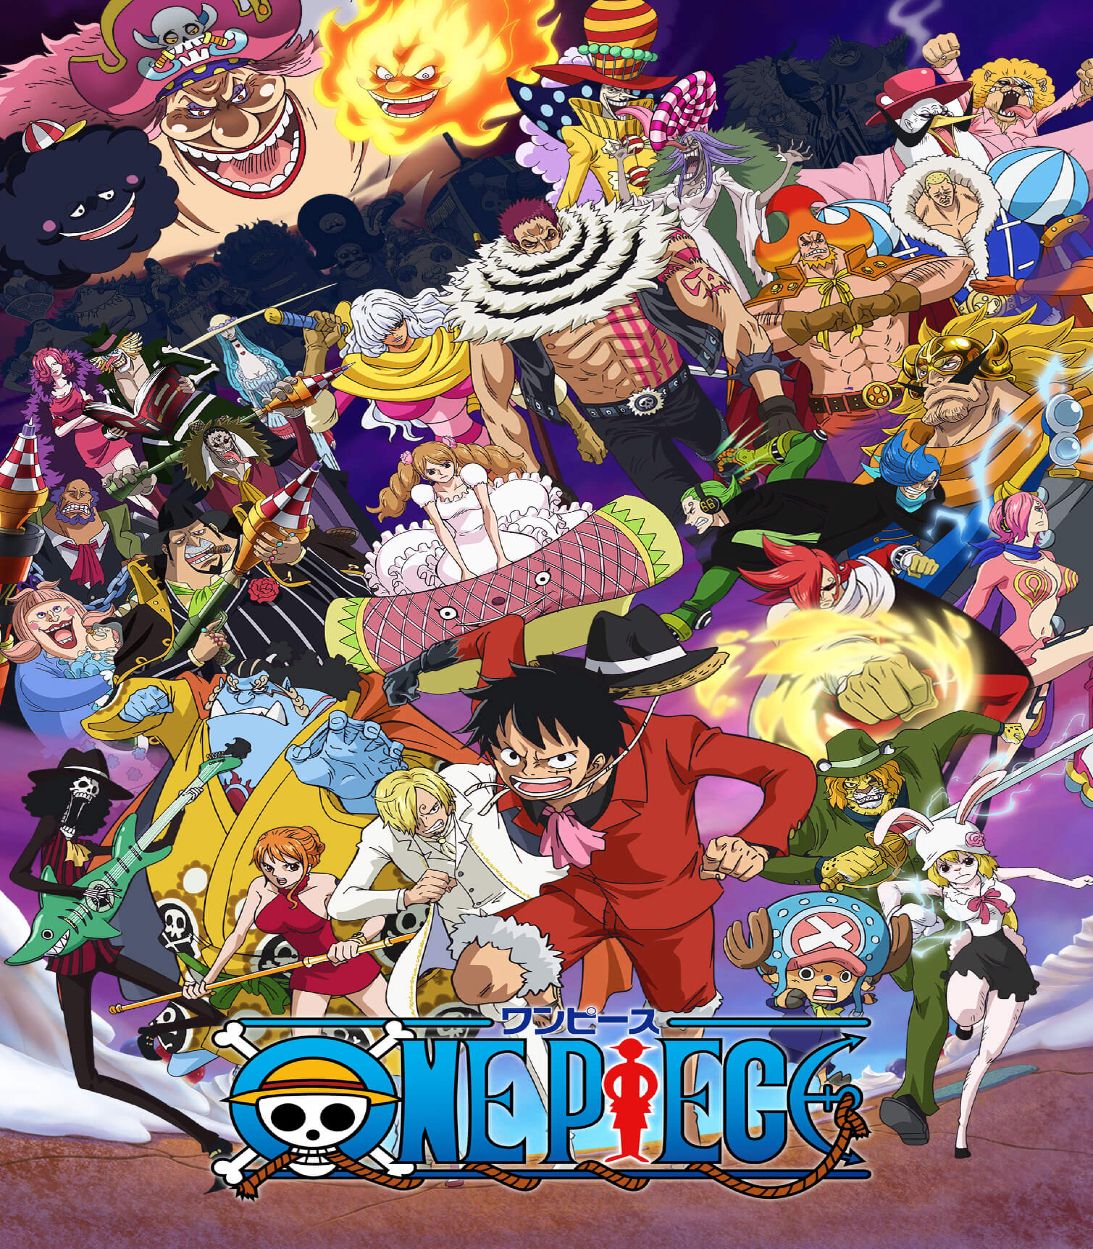 The cast of One Piece is coming together